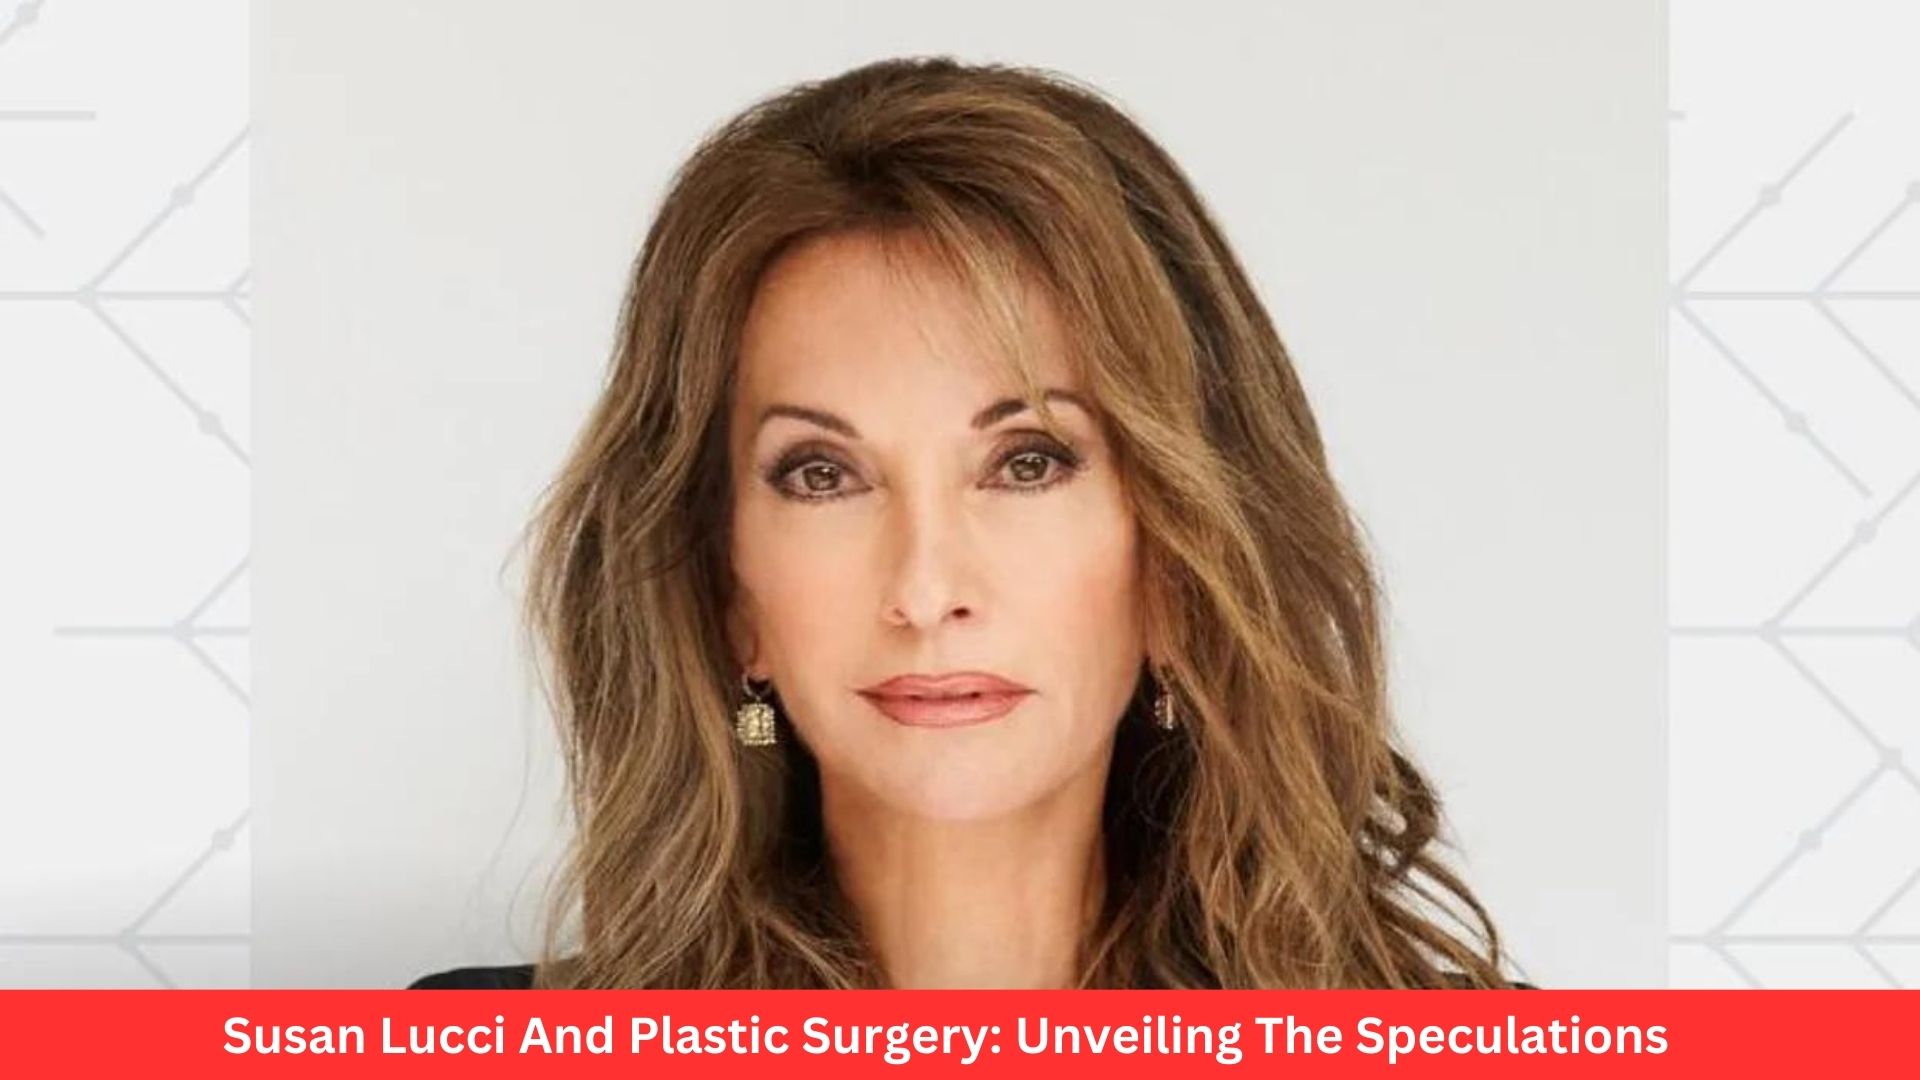 Susan Lucci And Plastic Surgery: Unveiling The Speculations